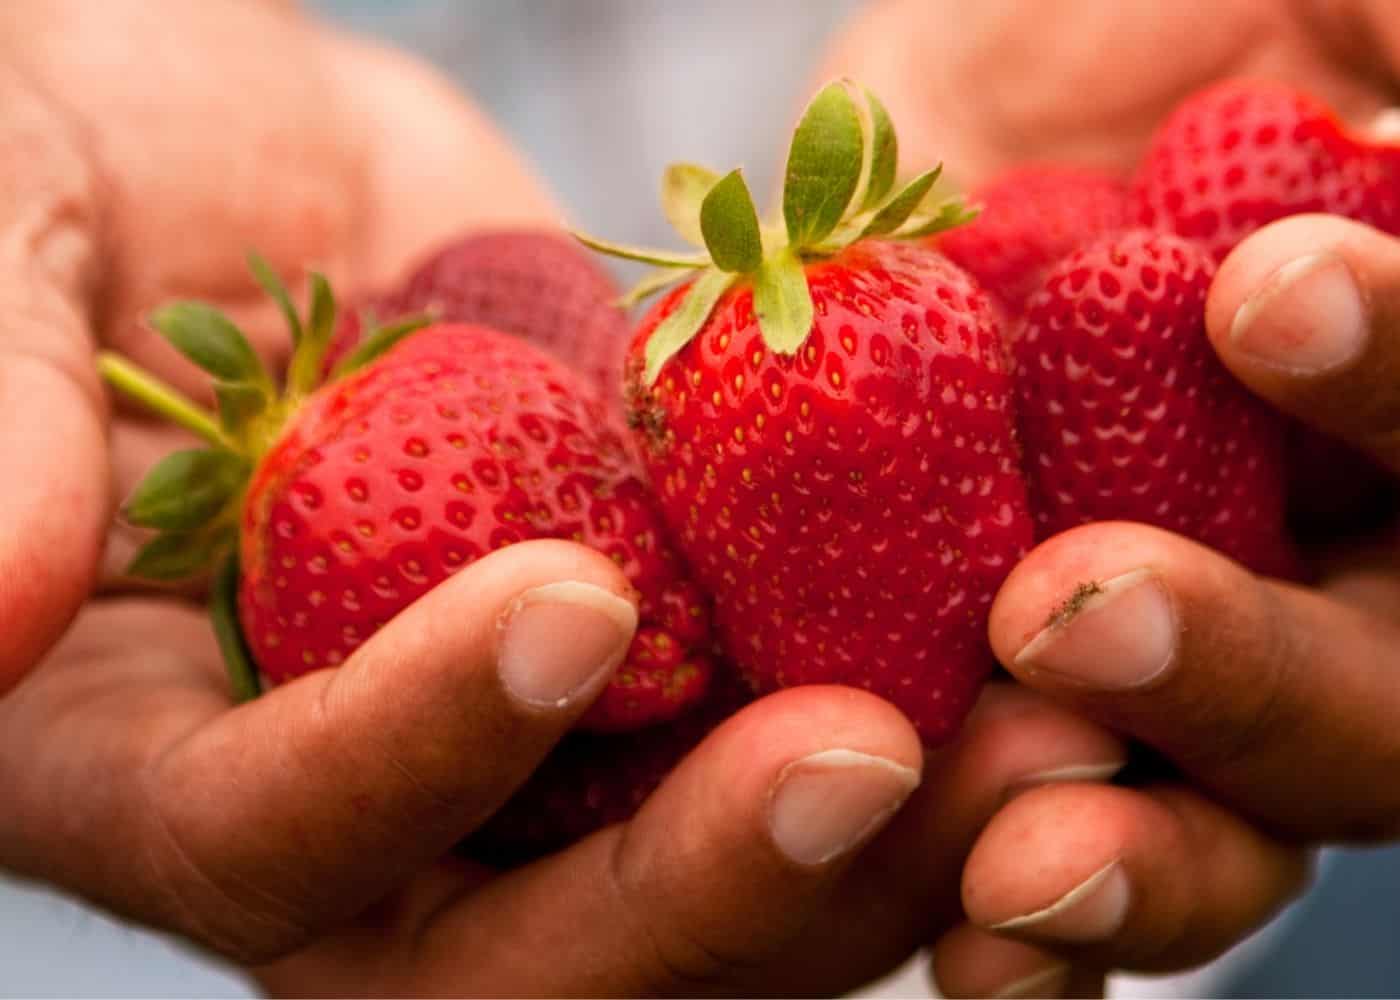 Companion plants for strawberries - what to avoid